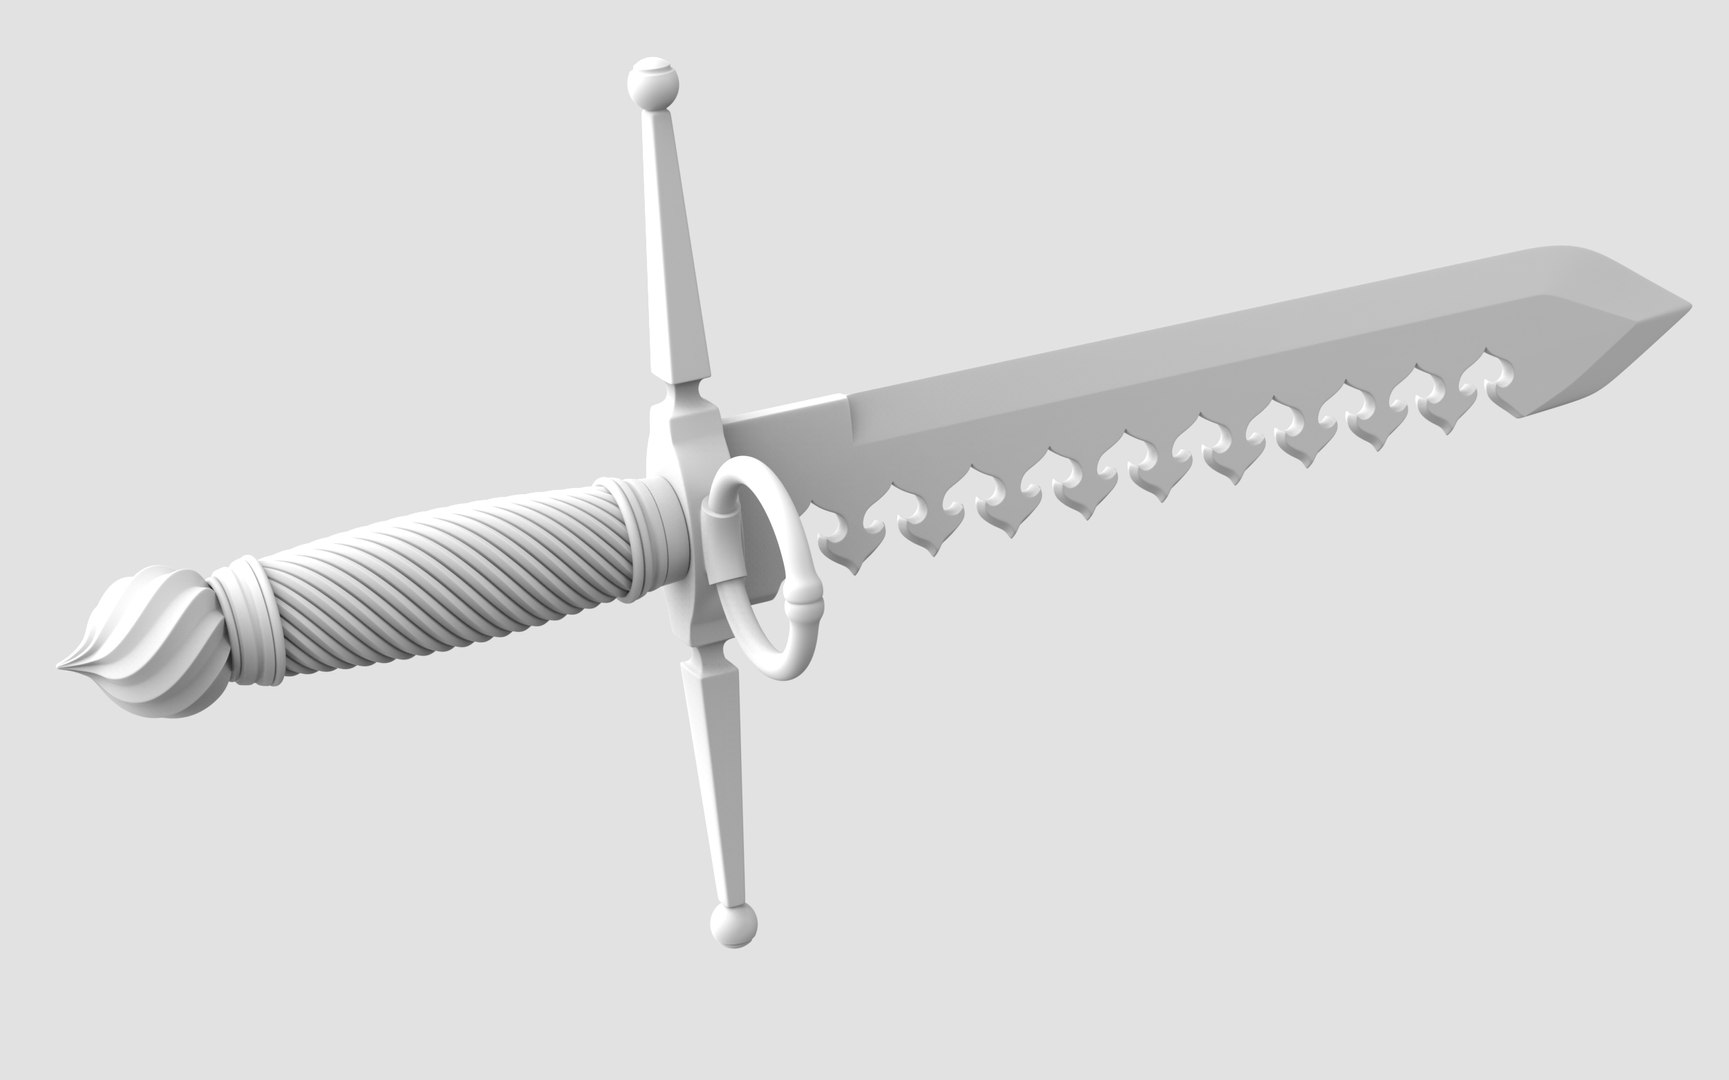 3D Printed Sword Breaker with Four-sided Prism-shaped Blades